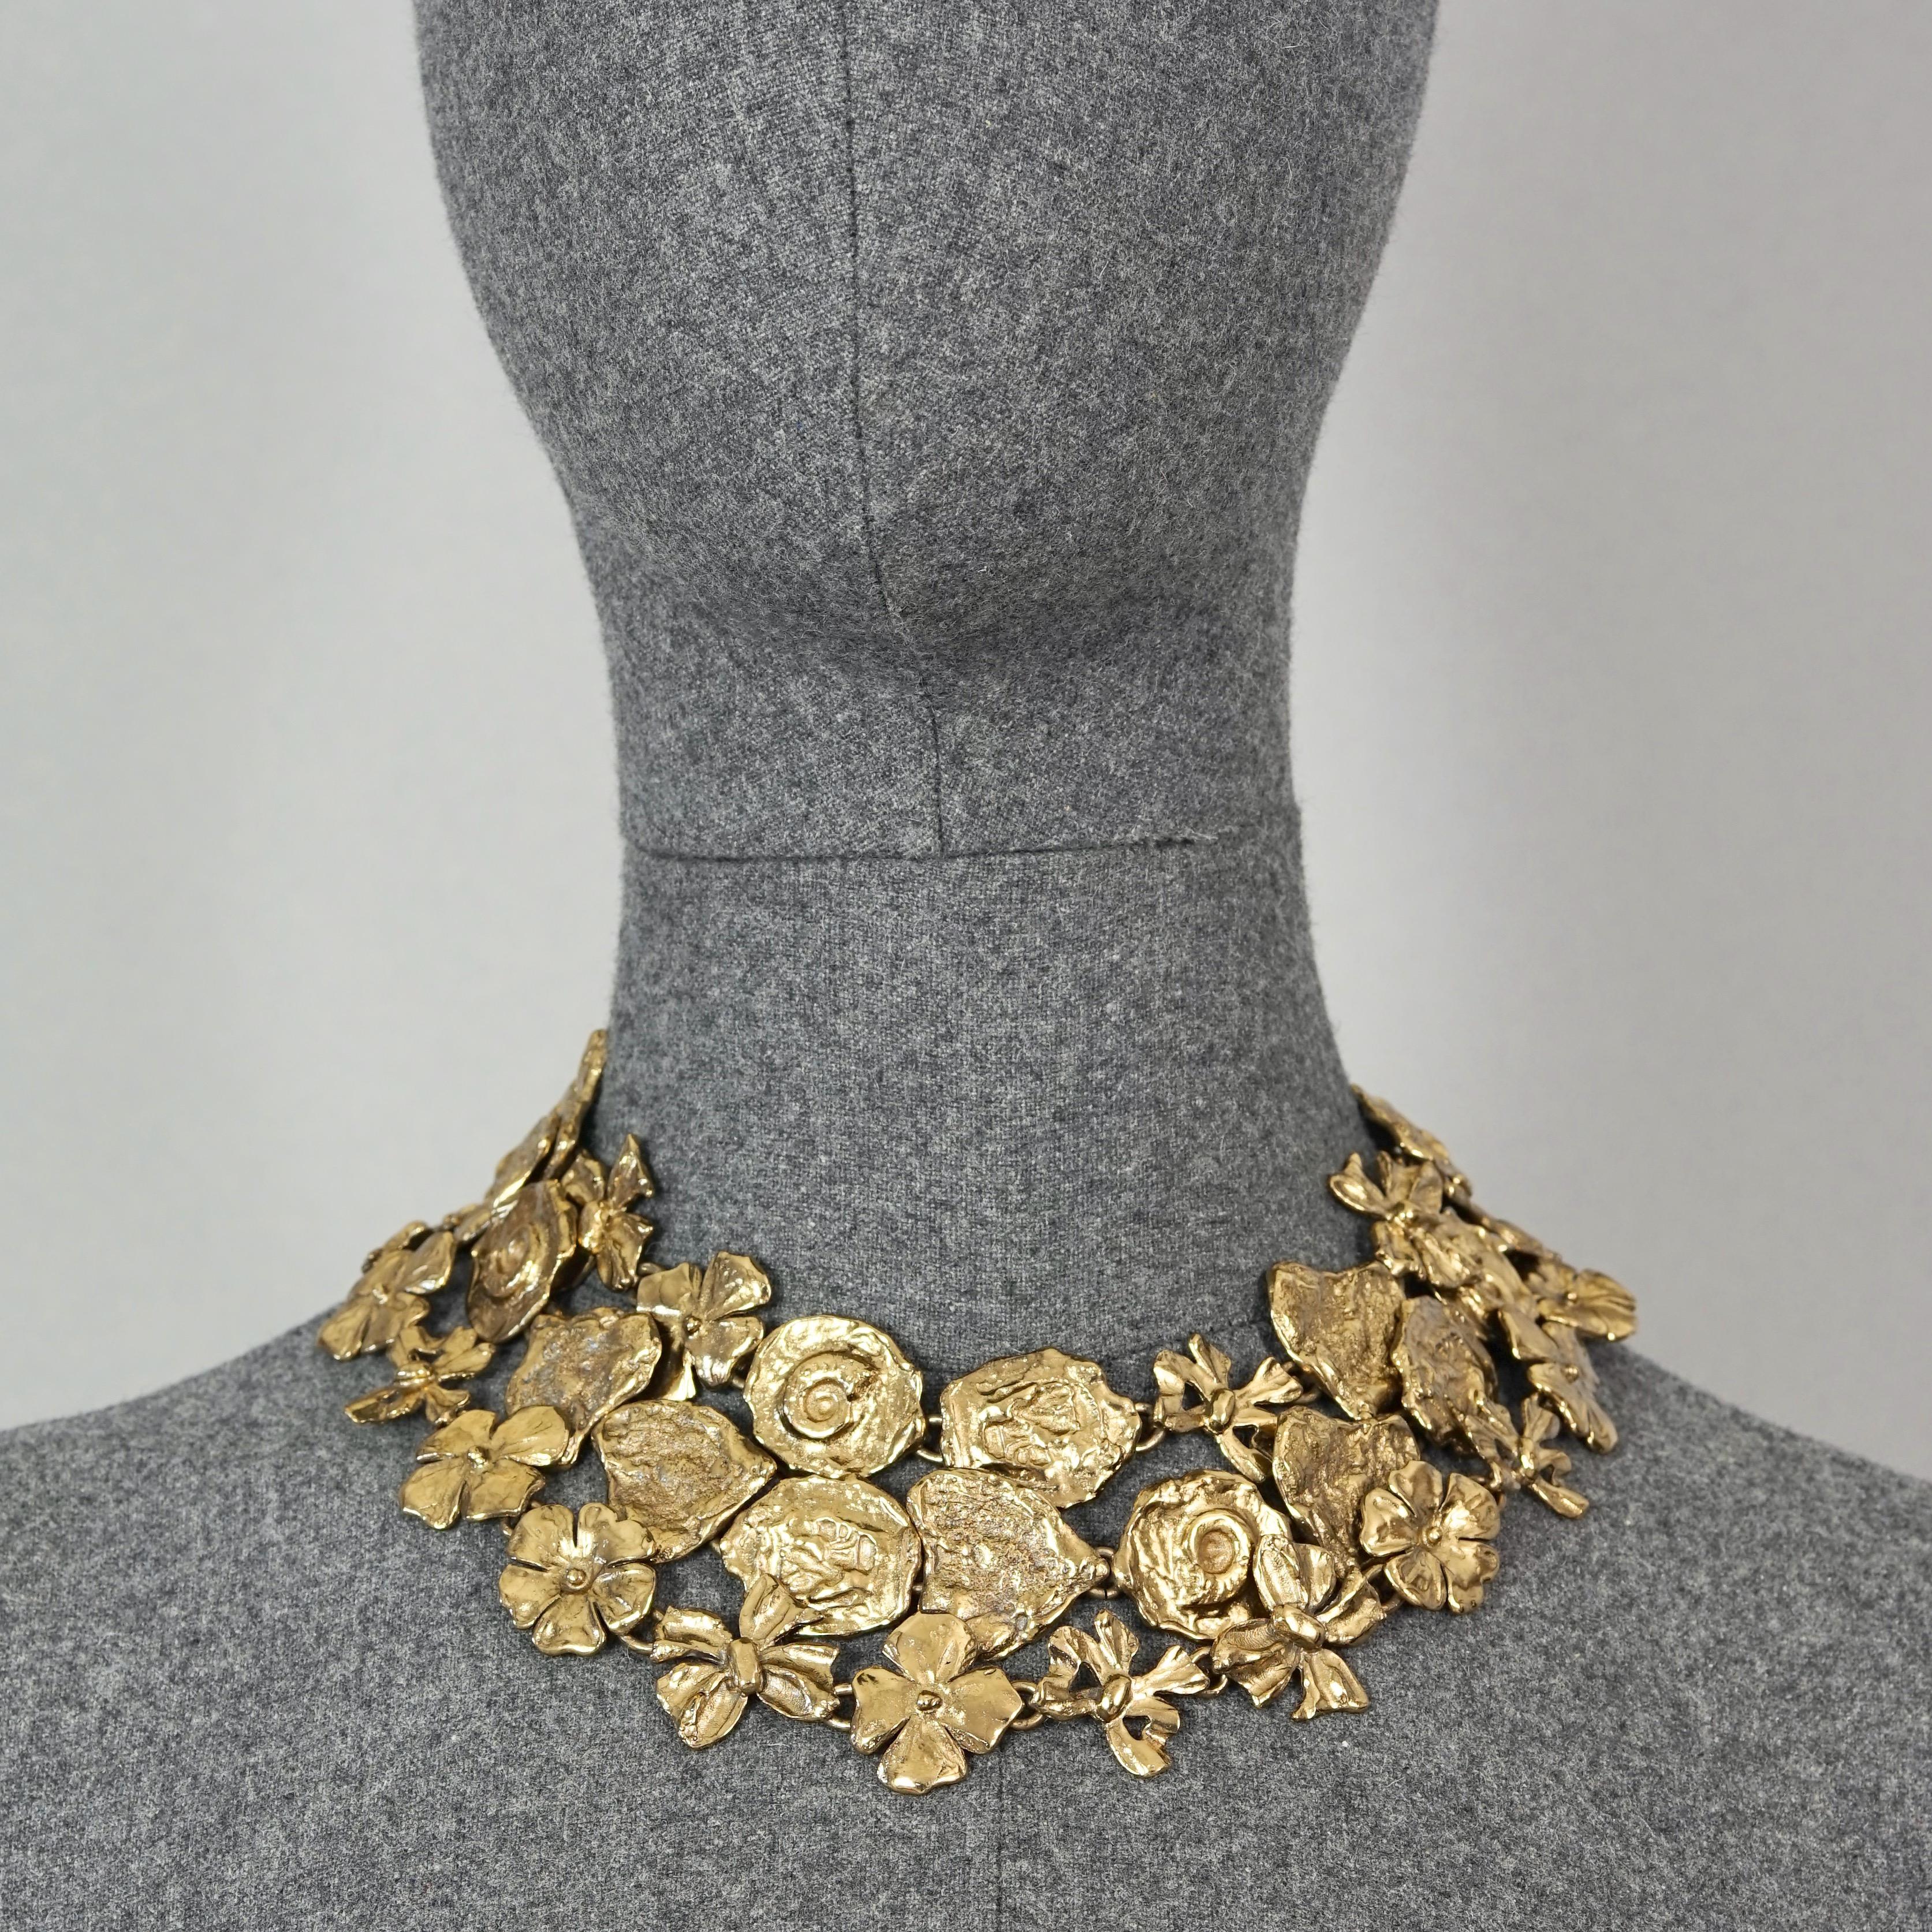 Vintage YVES SAINT LAURENT by Goossens Fossil Heart Bow Multi Layer Necklace

Measurements:
Height: 2.76 inches (7 cm)
Wearable Length: 16.14 inches (41 cm)

Features:
- 100% authentic YVES SAINT LAURENT by Robert Goossens.
- Multi layer necklace